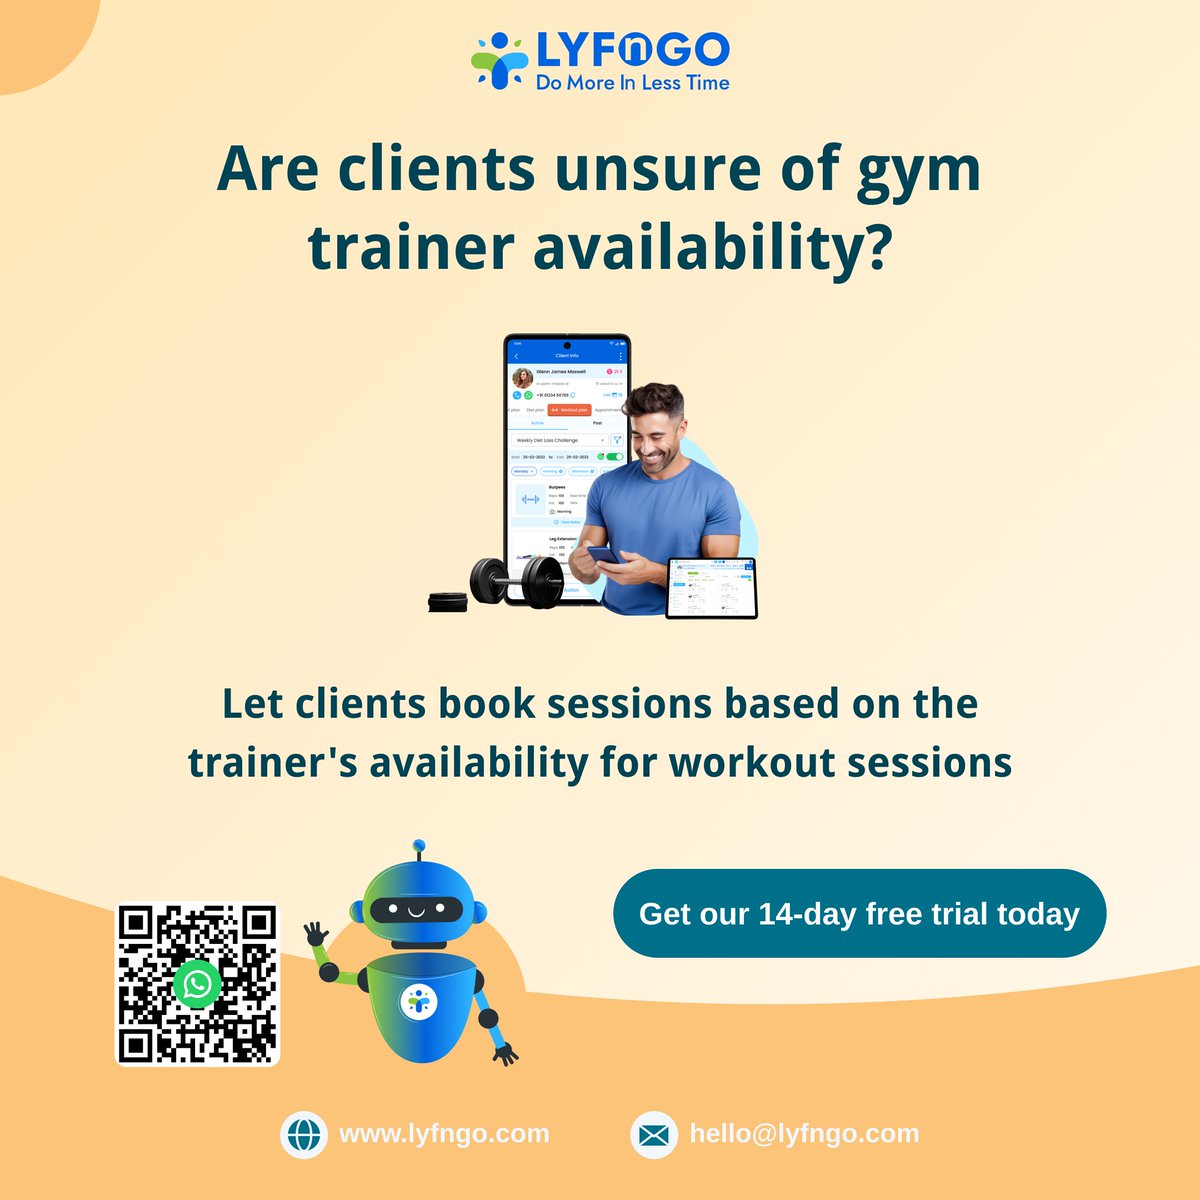 Stop the Scheduling Struggle and Start Crushing Your Fitness Goals!
Book sessions instantly based on your trainer's current availability.
Get a personalized program designed specifically for you and your goals.
Book your sessions today!
#LYFnGO #fitnesstips #life #today #trending